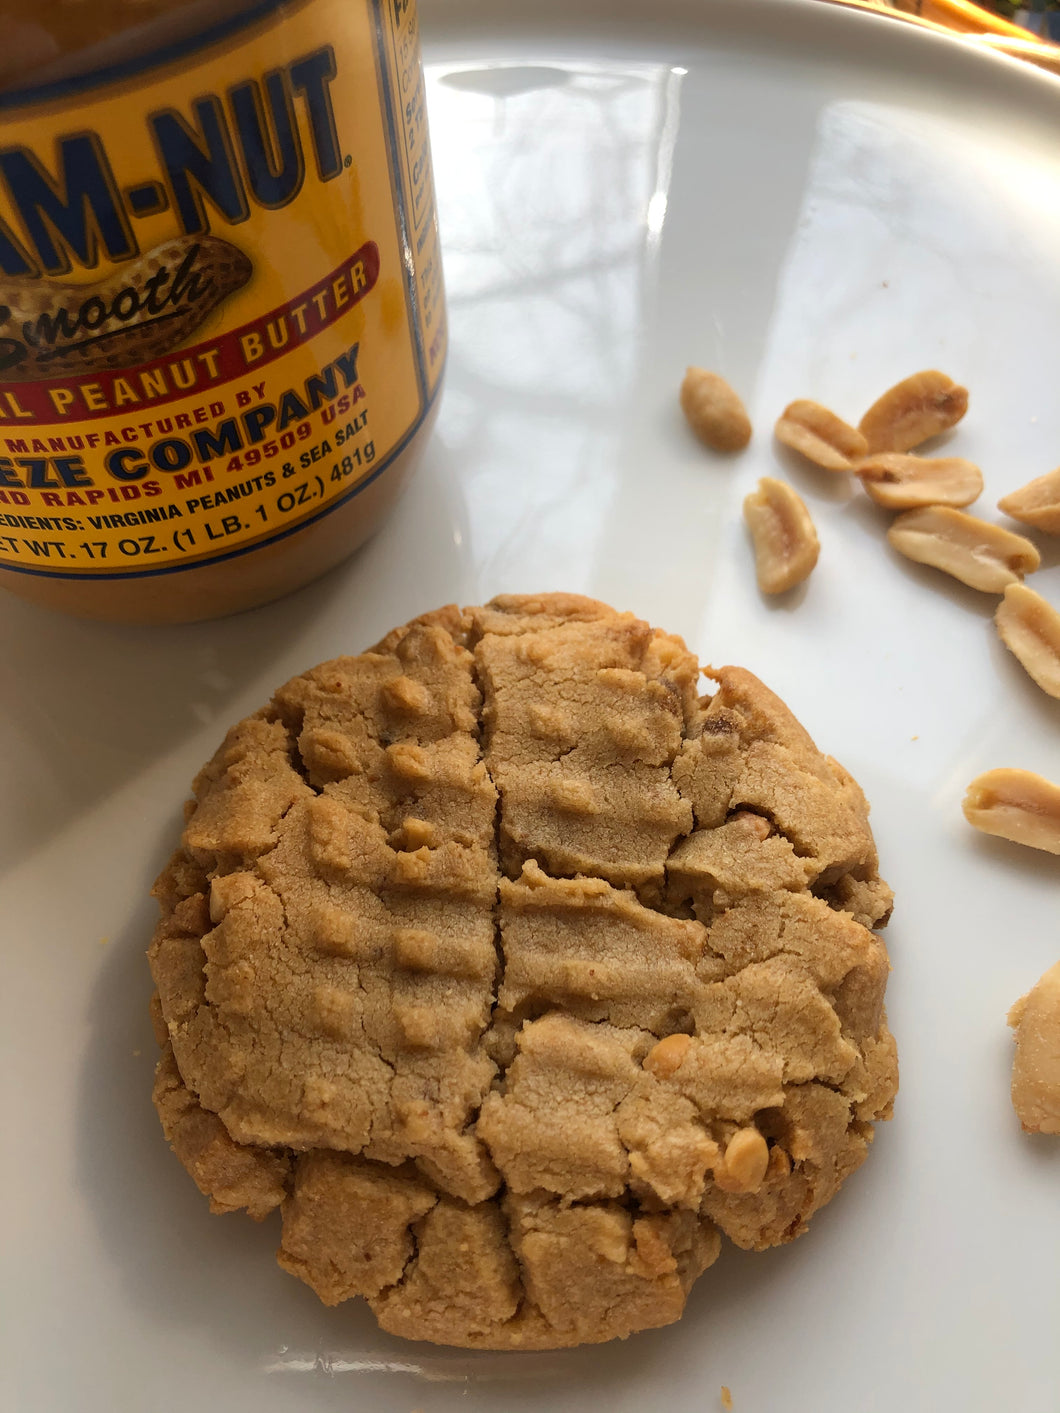 Crunchy Old Fashioned Peanut Butter Cookies